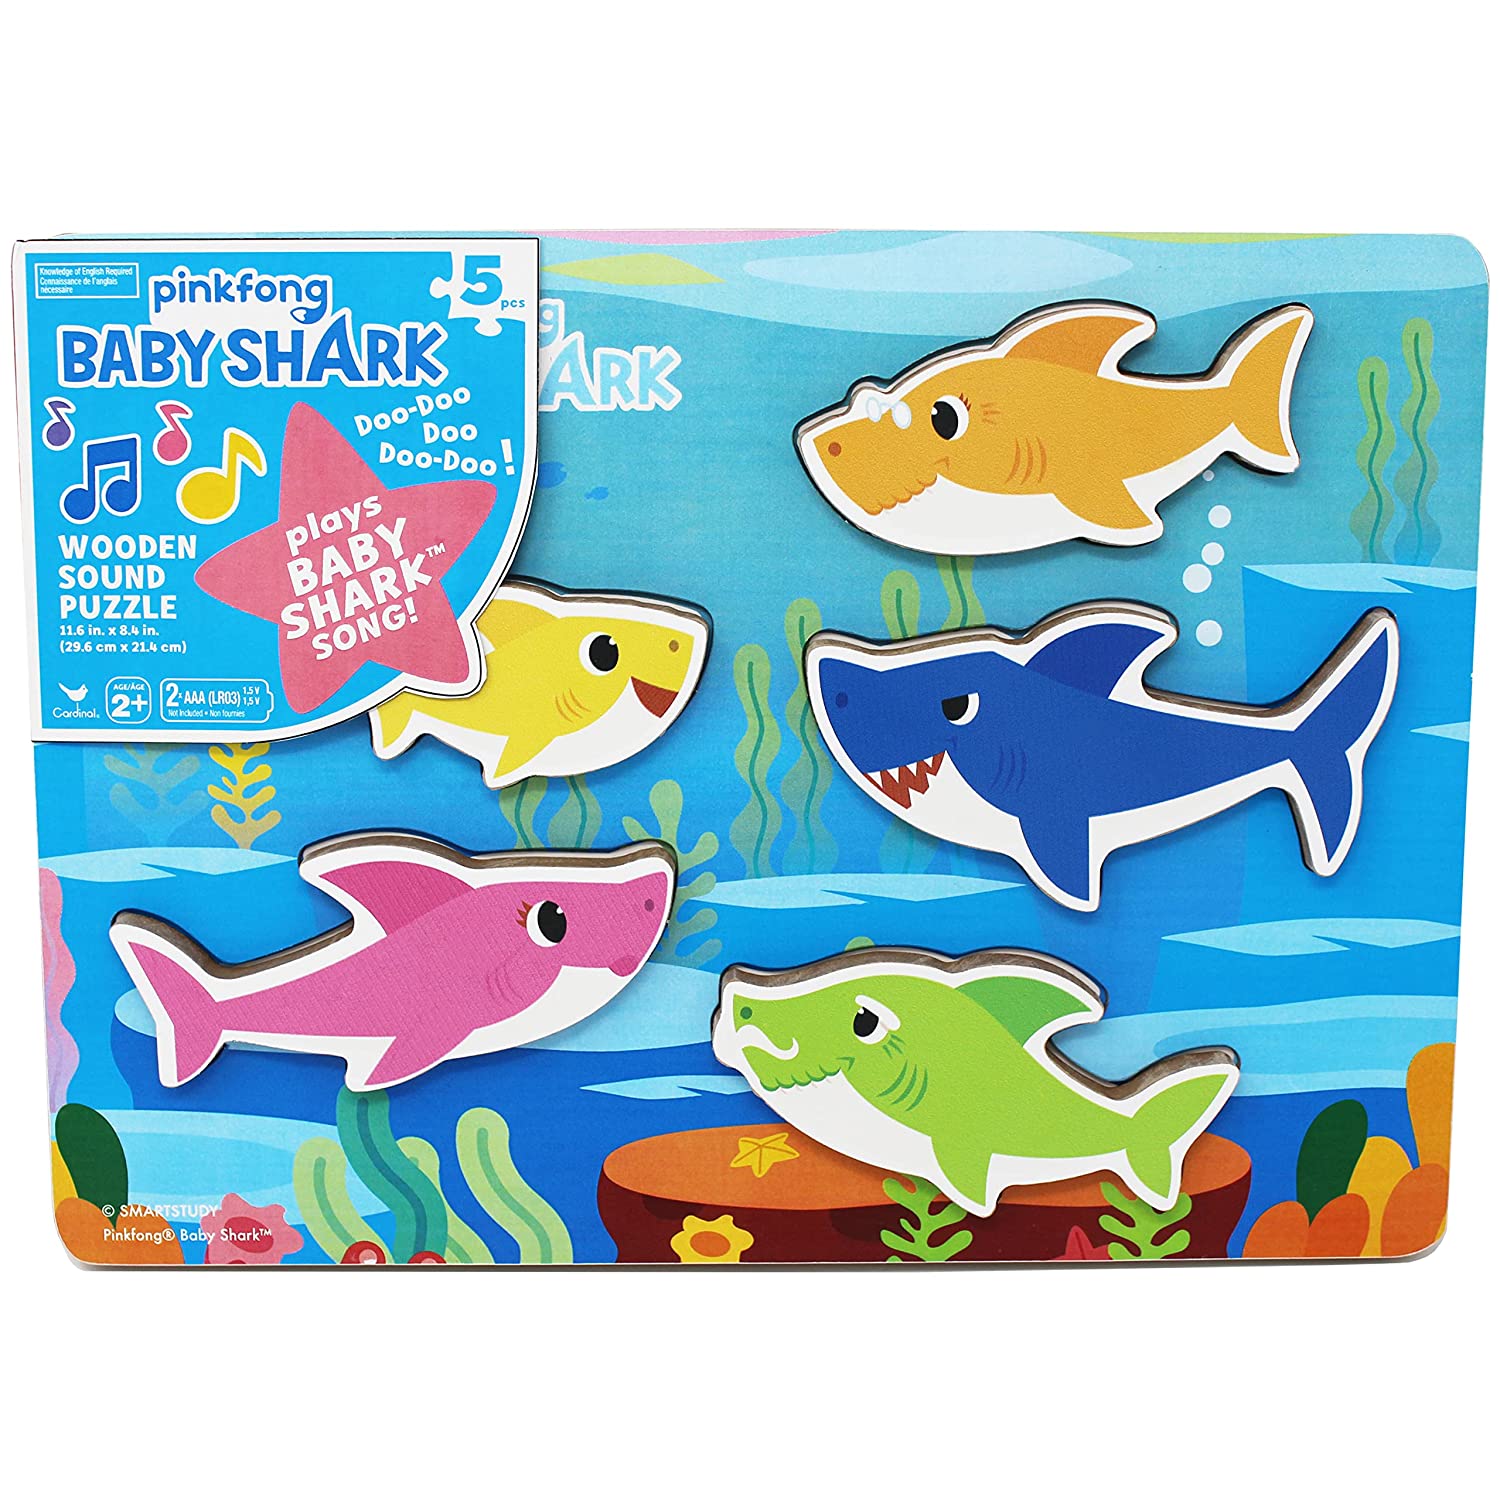 Pinkfong Baby Shark Chunky Wood Sound puzzle